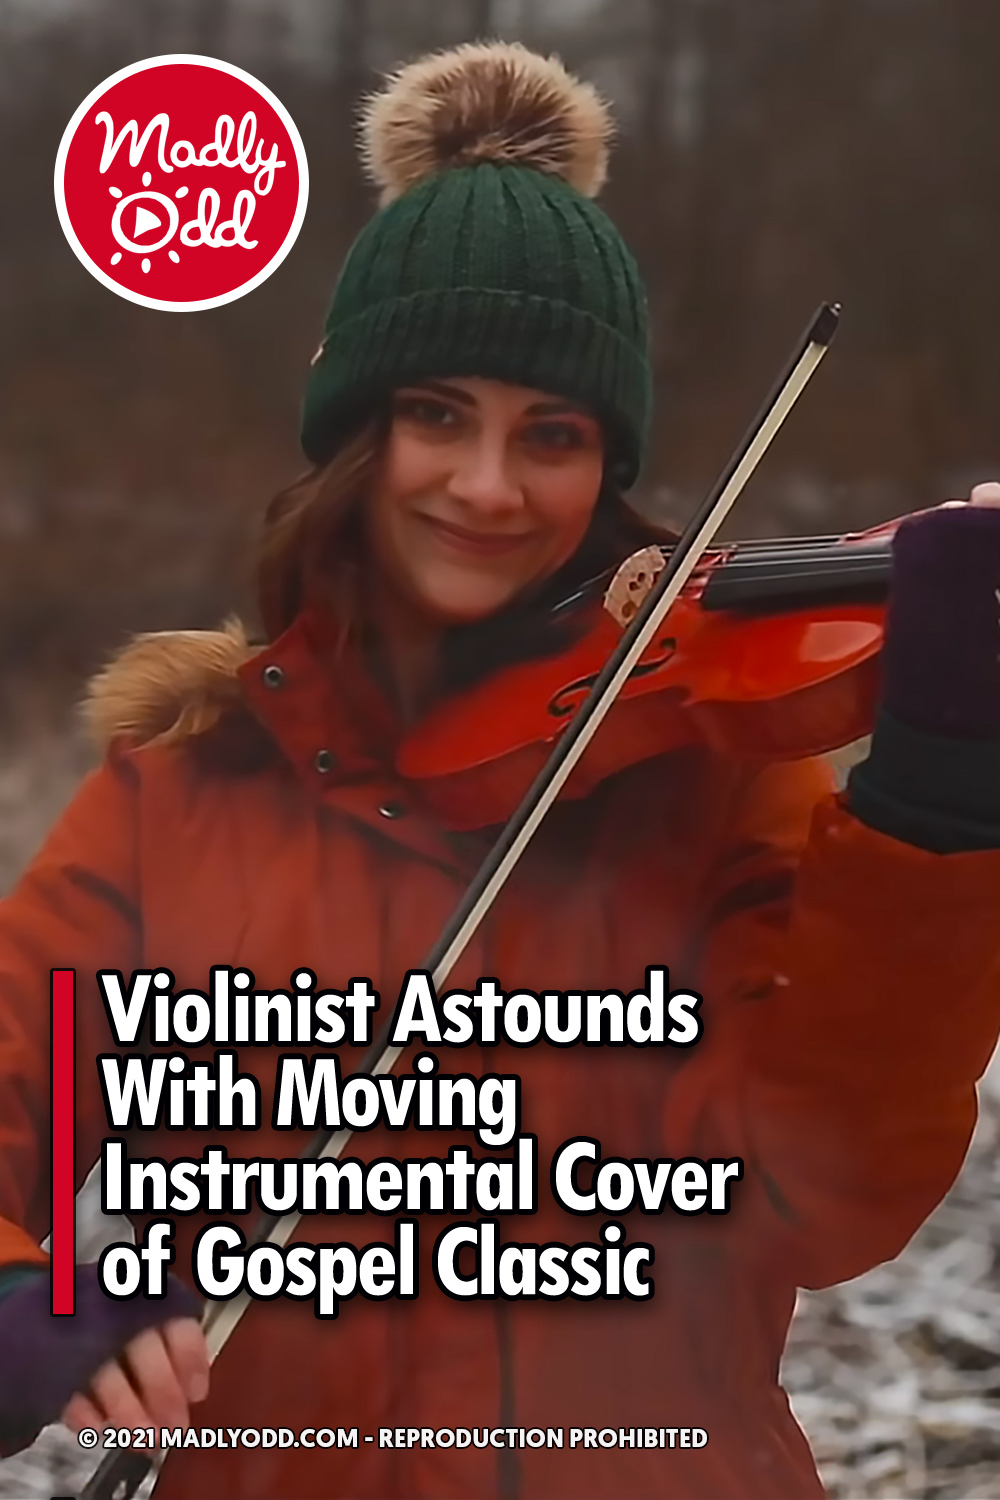 Violinist Astounds With Moving Instrumental Cover of Gospel Classic